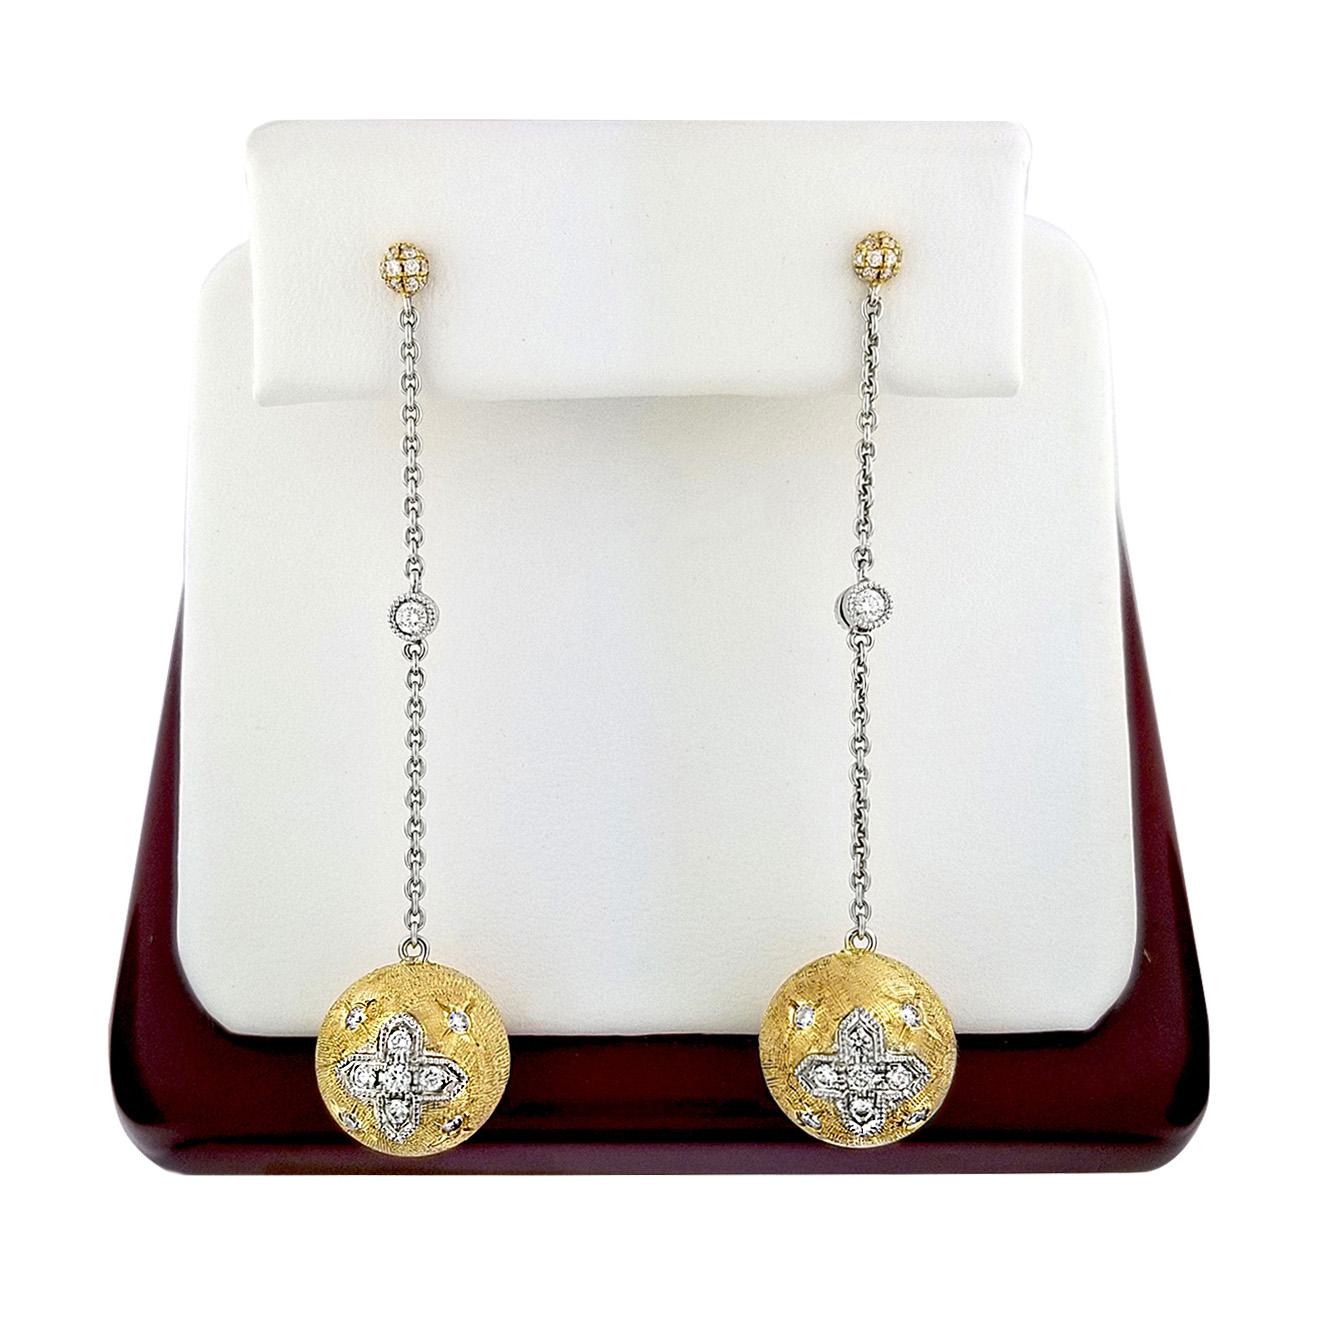 Produced by award winning Italian designer Stefano Vitolo. Stefano creates custom artisanal one of a kind jewelry with excellent gemstones in a truly old world Italian craftmanship.
These handcrafted earrings have 0.51 total carat weight of F/G